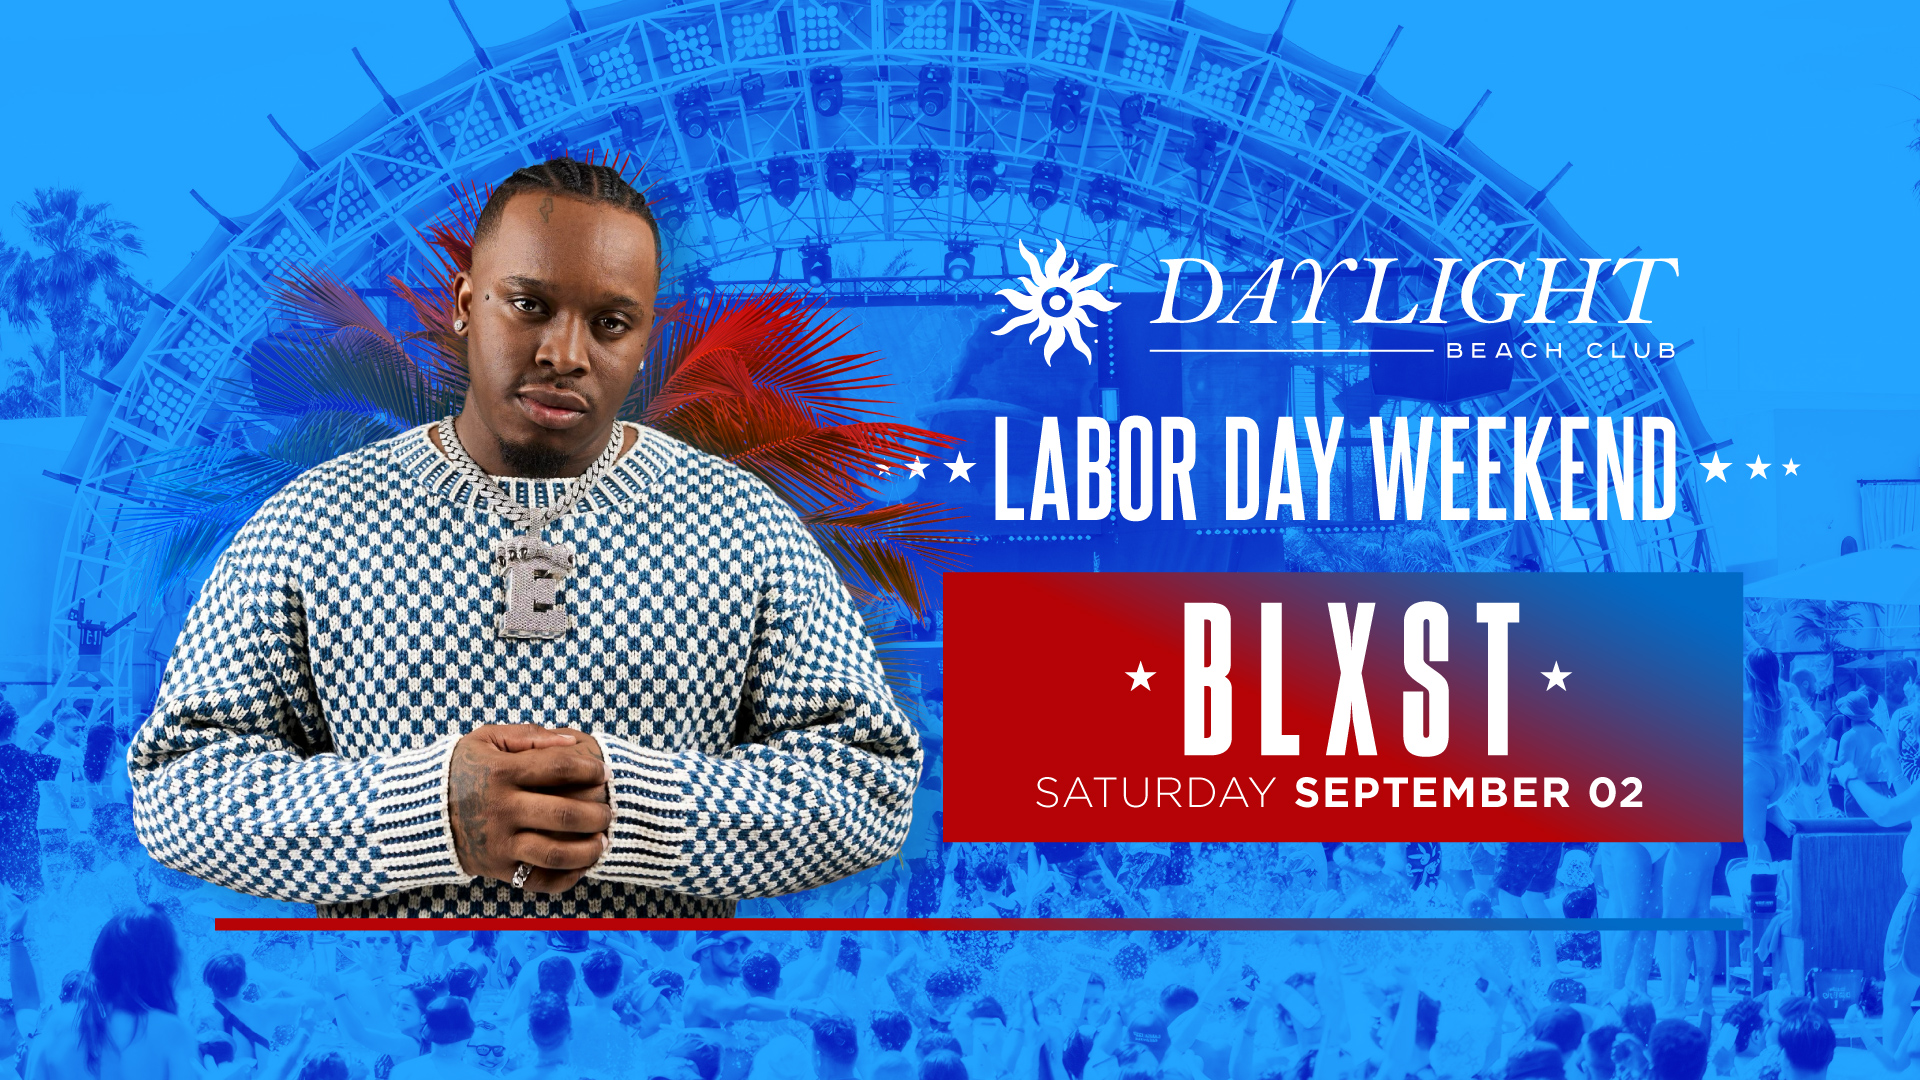 Labor Day Weekend at DAYLIGHT